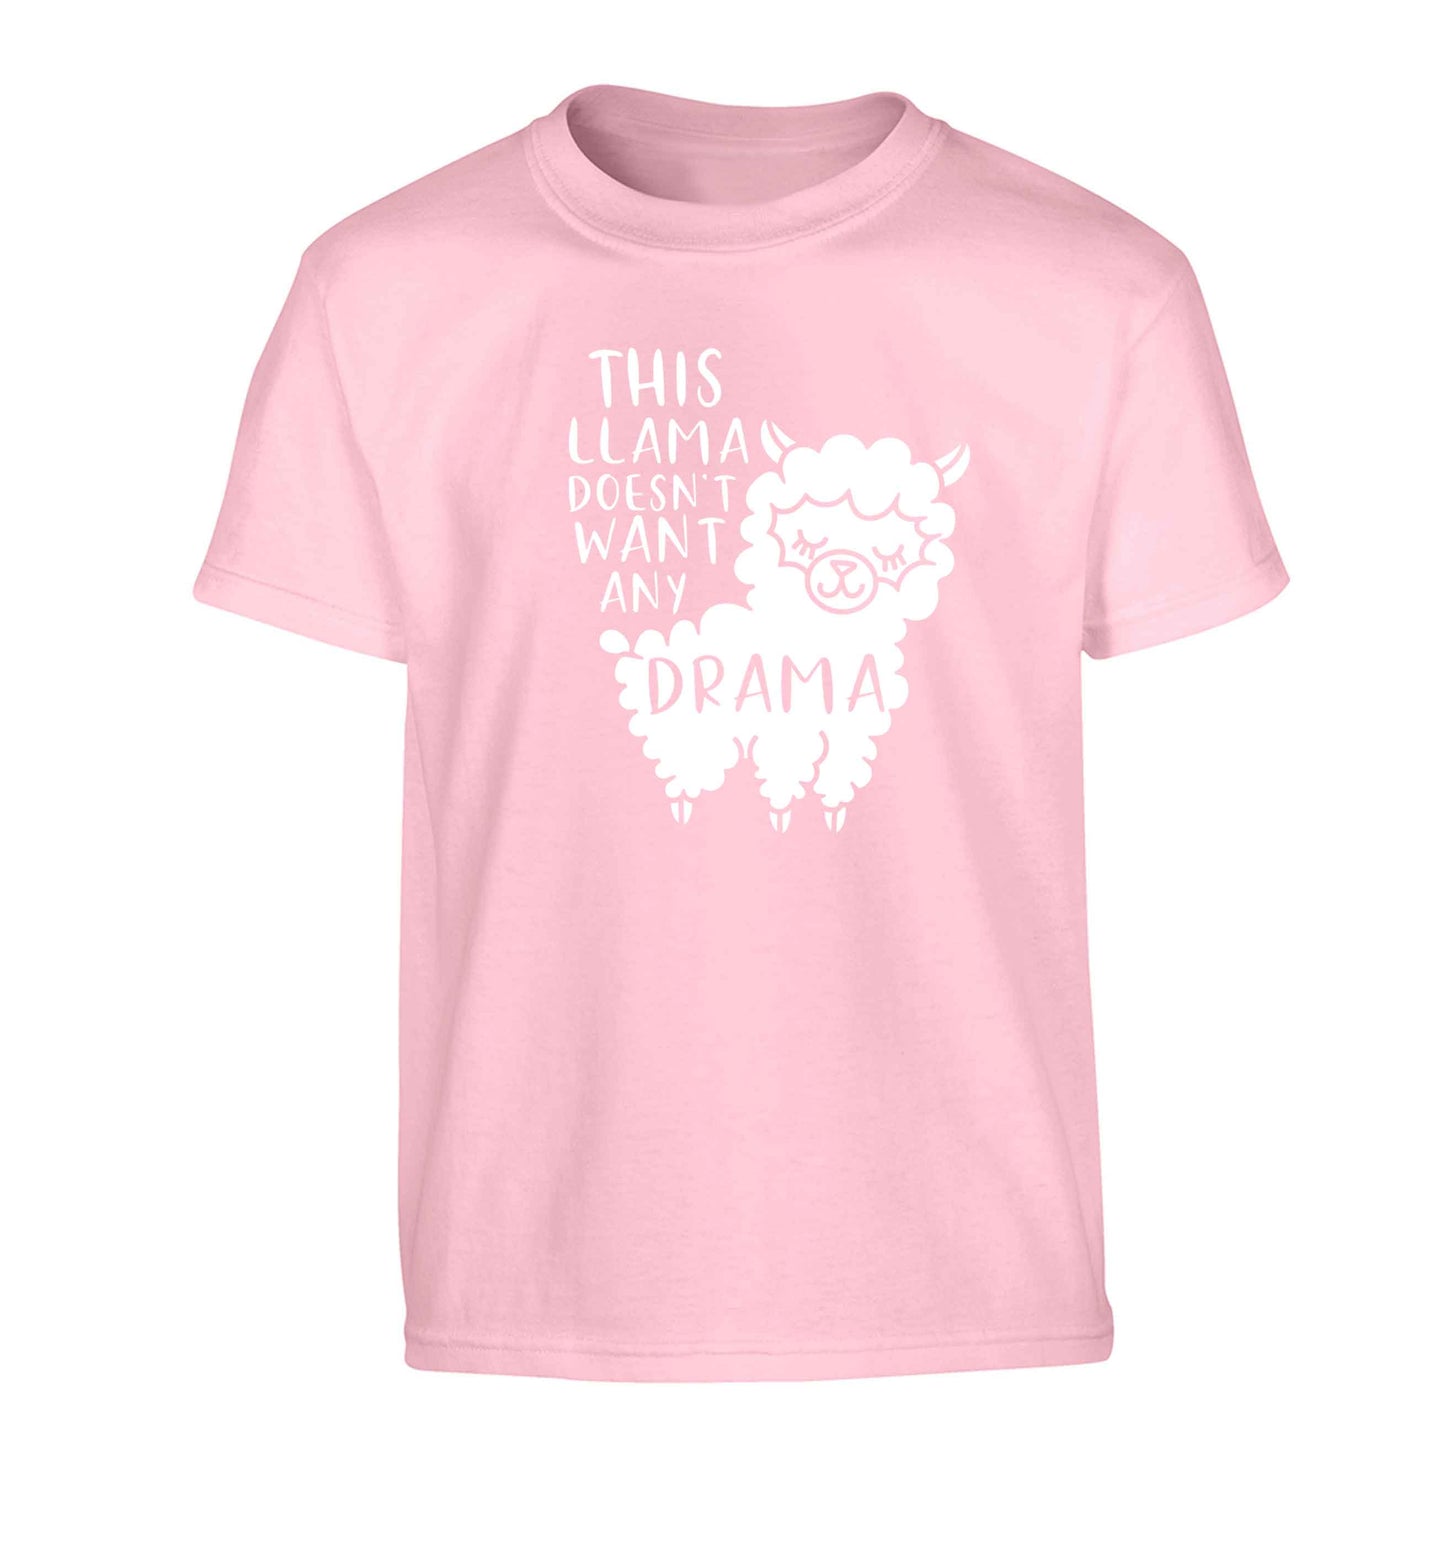 This Llama doesn't want any drama Children's light pink Tshirt 12-13 Years